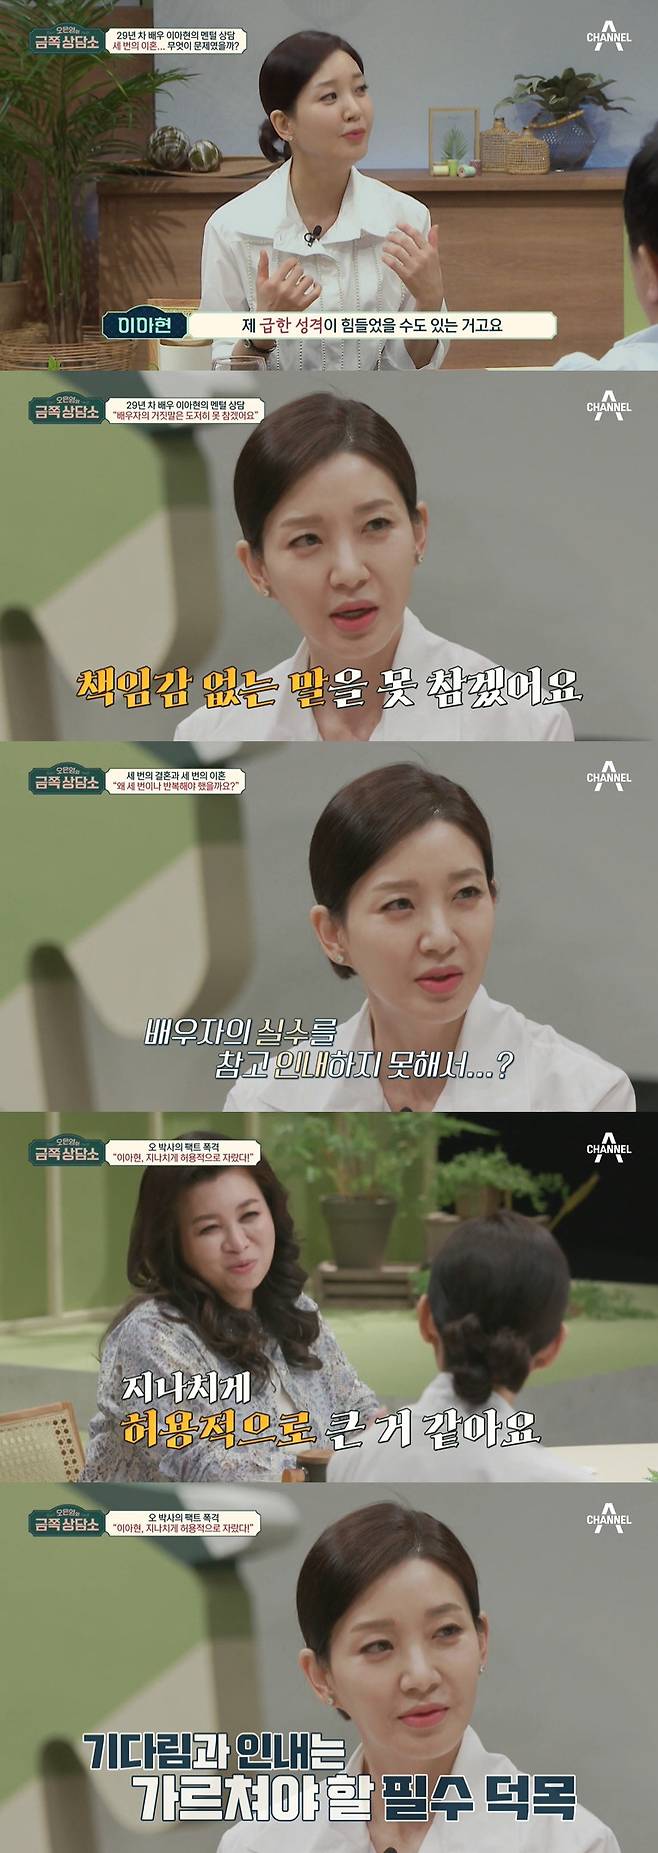 Lee Ah-hyun, a gold counselor, expressed his sorry for the adopted daughters.Actor Lee Ah-hyun appeared in the channel A entertainment program Oh Eun Youngs Golden Counseling Center on the 22nd.Lee Ah-hyeun commented on his troubles: There are so many worries; if you lie down to sleep, the star troubles do not break the tail of your tail.Lee Ah-hyun said, I am actually a little worried about what will not happen, he said. If I do not have it, my children start to worry about what will happen.I keep worrying about the future when I bite my tail on my tail. Oh Eun Young said: The treasure-like gift God gave to man is worry and anxiety.I have to protect and prepare myself to some extent. But Lee Ah-hyuns worries and anxiety are high. Lee Ah-hyun can not stay still.Lee Ah-hyun said, Im cleaning up in less than 30 minutes to watch the movie. My first daughter recently visited Korea and saw me for about two weeks.Can not you stay still? I wanted to be an adult ADHD at the time, but my daughter and mother were diagnosed by my teacher. It is harder to endure something.Oh Eun Young, who saw Lee Ah-hyeuns daily life that could not stand a dust, said, Its hard to say worry and anxiety, it seems very impatient.There is also cleanliness, but there is a lot of impatience. Three divorces and two child adoptions were also mentioned, Lee Ah-hyeun said: Isnt family members different from any other house, a lot of attention is paid to that?Those kids are all the same. I am so worried about this story that I treat my children scary to prevent it. Oh Eun Young said: The impatient nature affects interpersonal relationships a lot, I think we should expand interpersonal relationships.I think I should talk about my spouse, which is the most important object. Lee Ah-hyeun said, I think it would have been a bad result because it was hard. I thought it was a good person.I have regretted it a lot. I try not to do it now, but I seem to be repeating it. As for the reason for making a quick decision, When someone comes to me, I think it is easy to decide who else likes me other than this person.I defended that I did not even ask you to think about it again at home. My spouse may have had a hard time. Oh Eun Young said, If you repeat your experiences several times, it is common for learning to happen and make the next developed choice.But I would like to experience the painful results repeatedly about the problem of marriage. Lee Ah-hyun pondered that he believed in people immediately and that he was not patient.Lee Ah-hyun said, I grew up normal, I am strange. I learned everything I wanted to learn. Before vocal music, I went to violin, piano and study in the United States.I think he was greedy, he said.Oh Eun Young said, It seems too acceptable. It is true that my parents loved it, but I have to learn patience.I do not think I had much experience to endure, Lee Ah-hyeun admitted.One of Lee Ah-hyuns worries was the economic burden: Lee Ah-hyun said, I wouldnt worry alone, but I should be backing up the children.I think a lot about how to live without me. The end of worry is that idea. Lee Ah-hyun said,  (The children) I was able to go to a harmonious house with my mother and father, but I am sorry that I would have shared my pain that I do not have to meet with me.I always want to be better for my children because I am always inside. Oh Eun Young said, Happiness is not a physical condition. It is not a happy thing because physical conditions are provided.The children are loving because their mother is Lee Ah-hun, Lee Ah-hyun comforted.